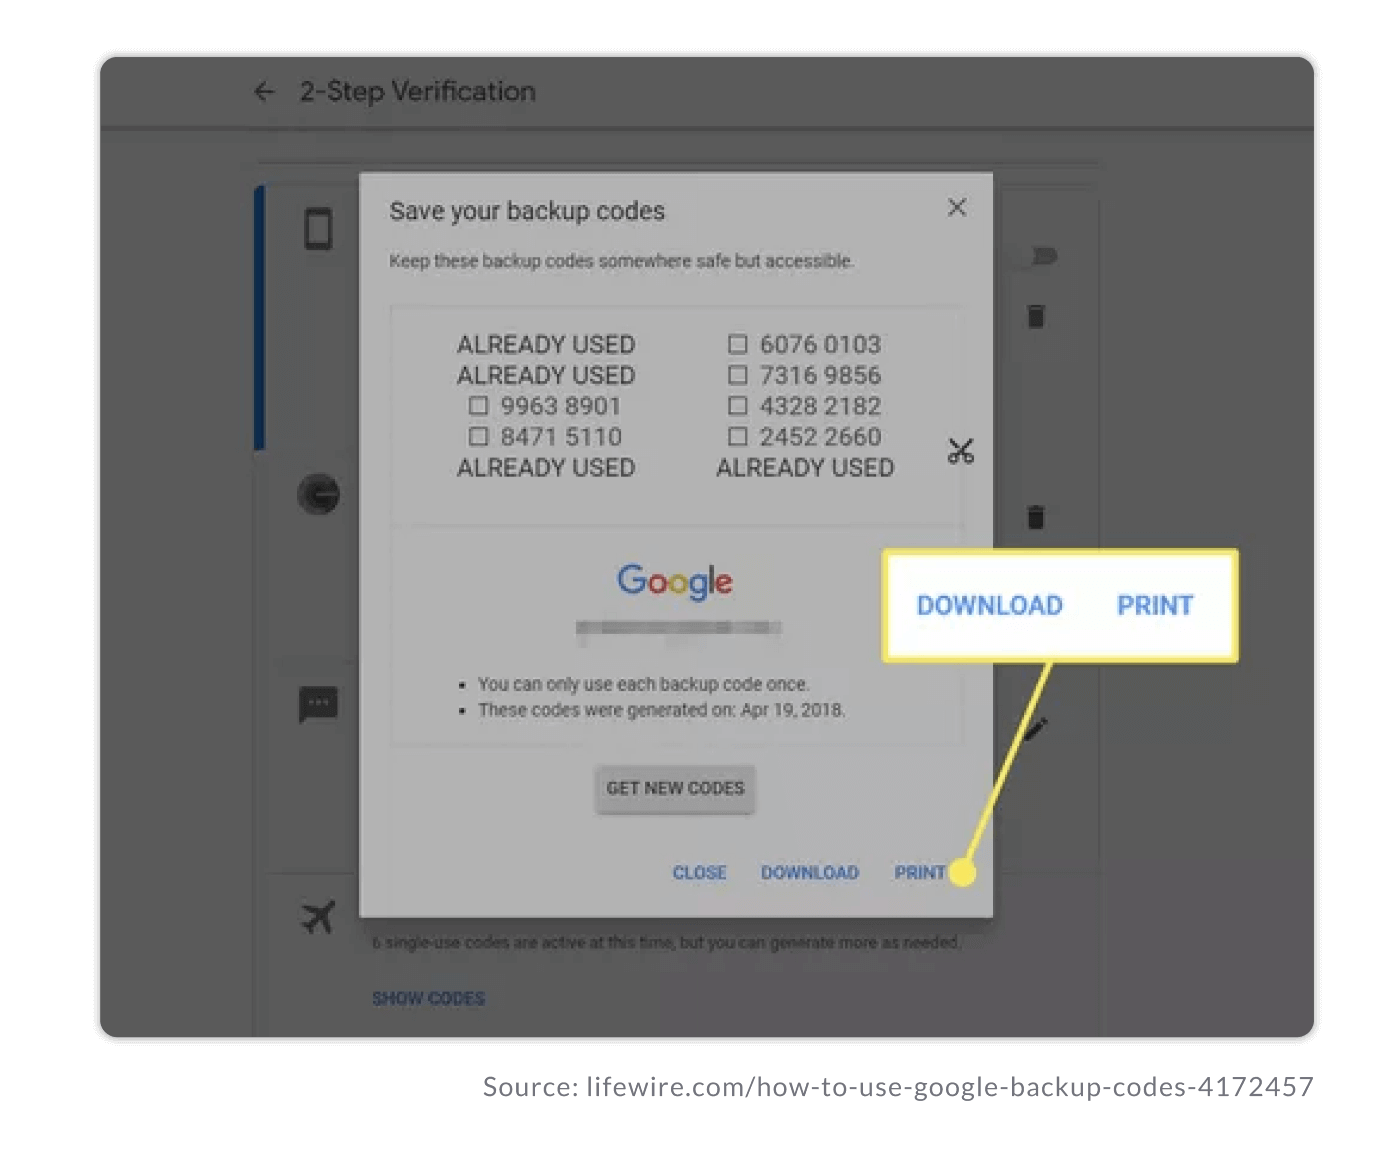 A screenshot of the Google account 2-step verification screen where the user is prompted to save their backup codes